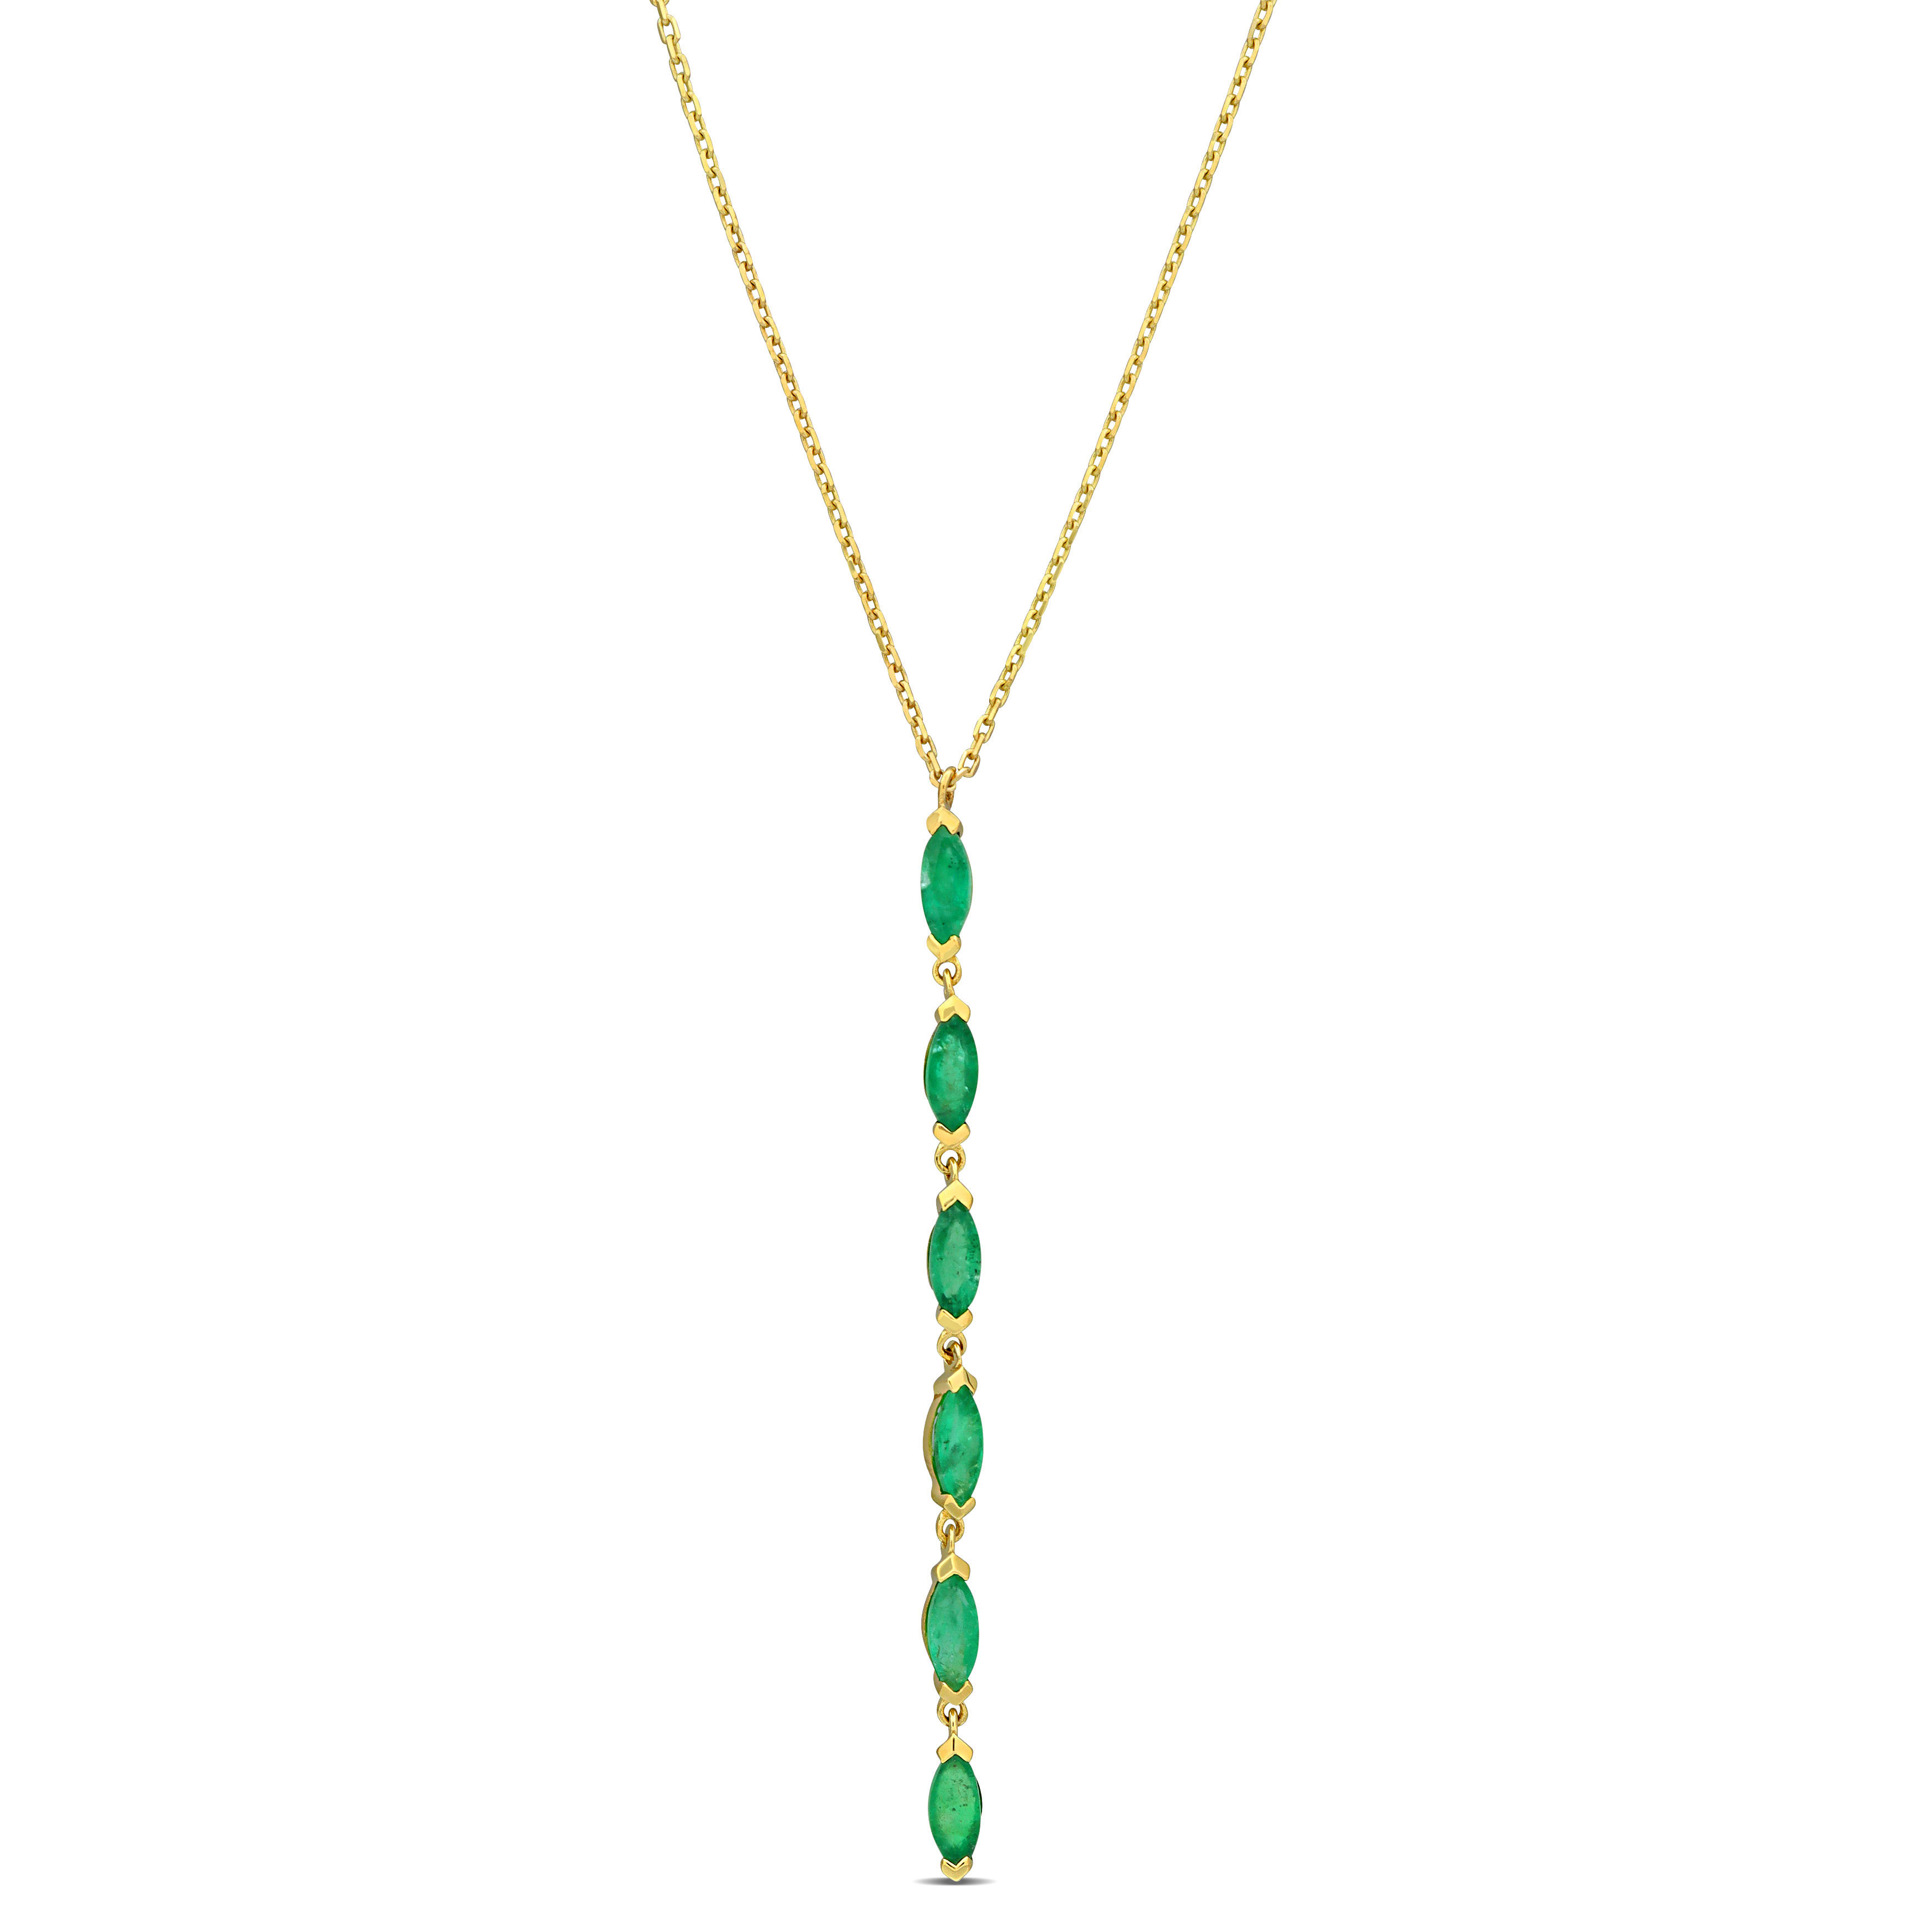 1 2/5 CT TGW Emerald Alternate Lariat Necklace in 10k Yellow Gold - 17 in